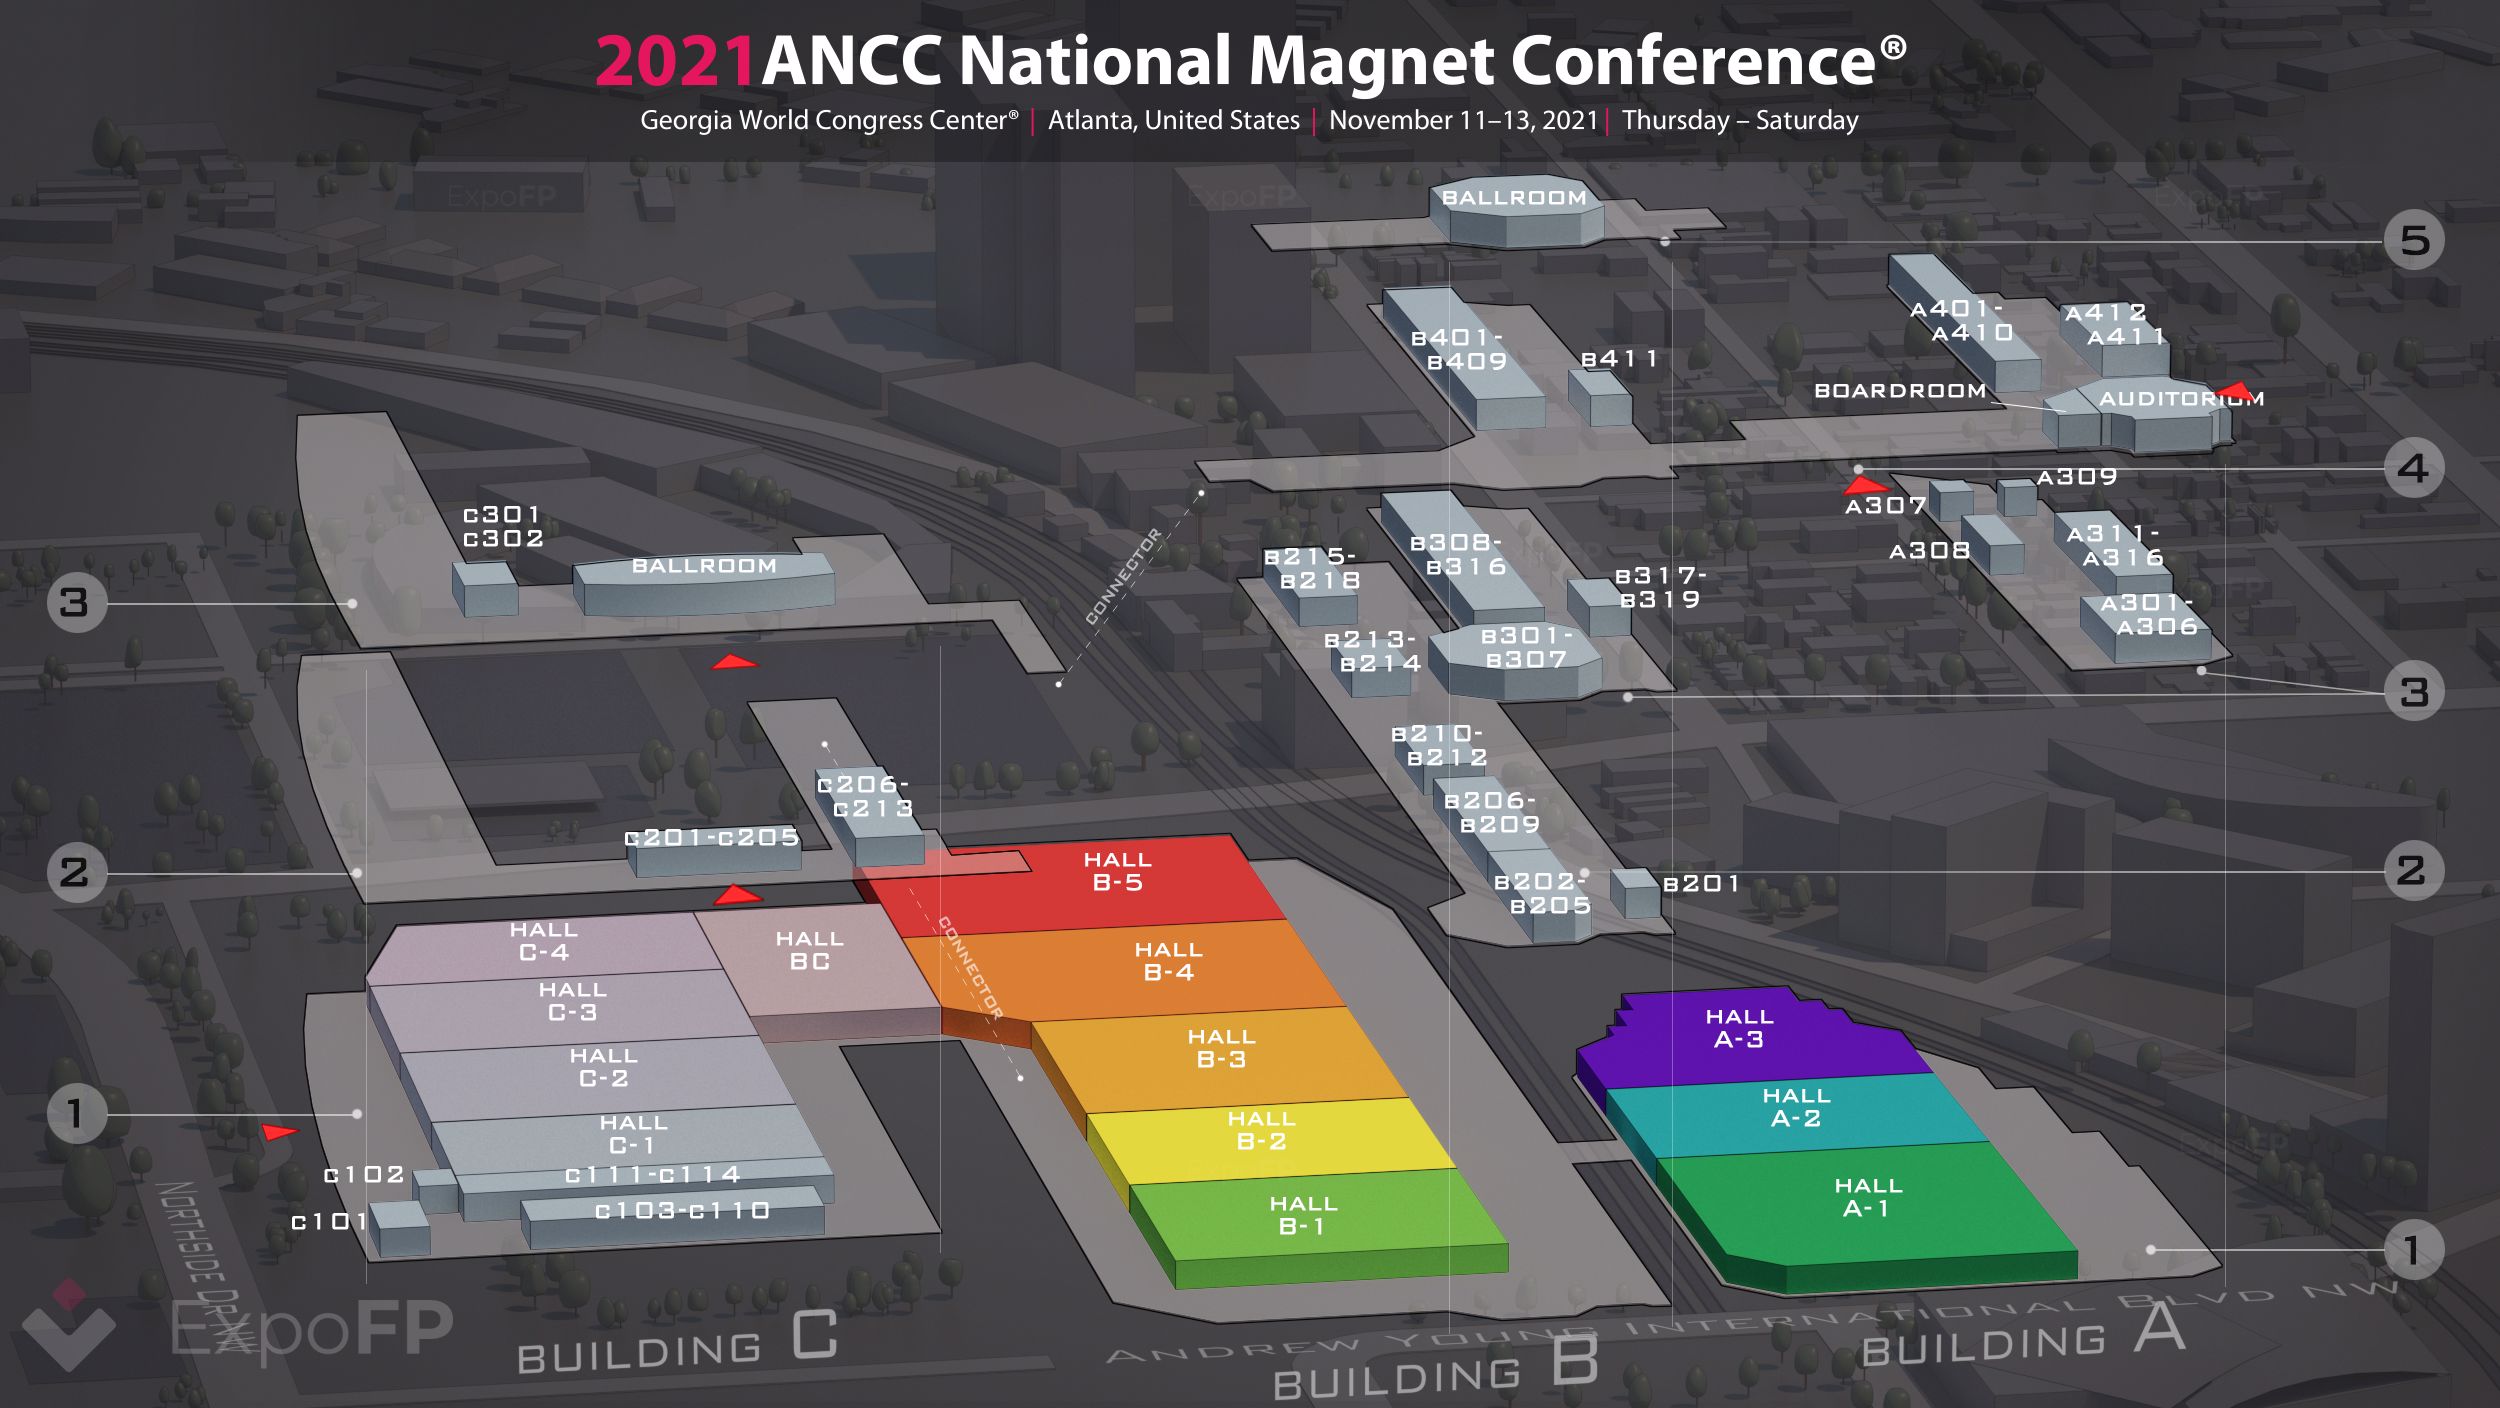 ANCC National Conference 2021 in World Congress Center